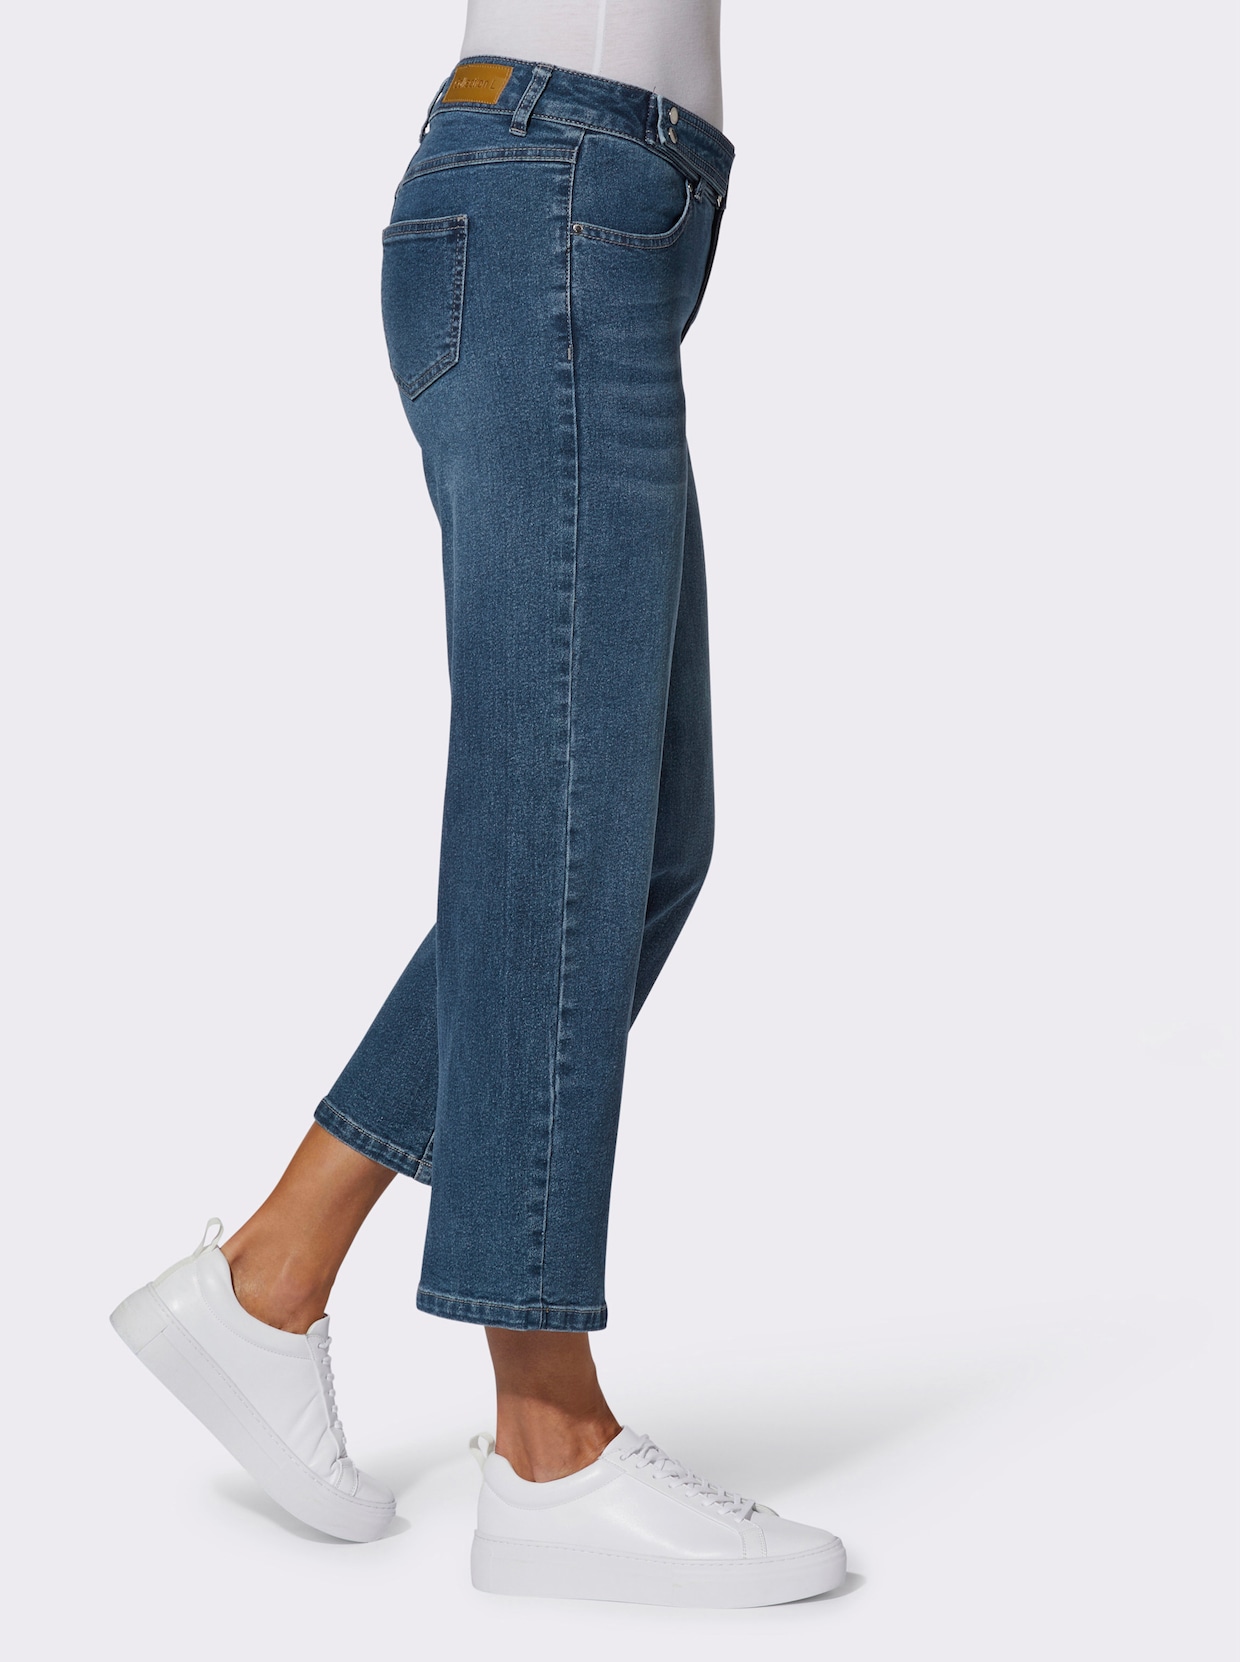 Jeans-Culotte - blue-stone-washed